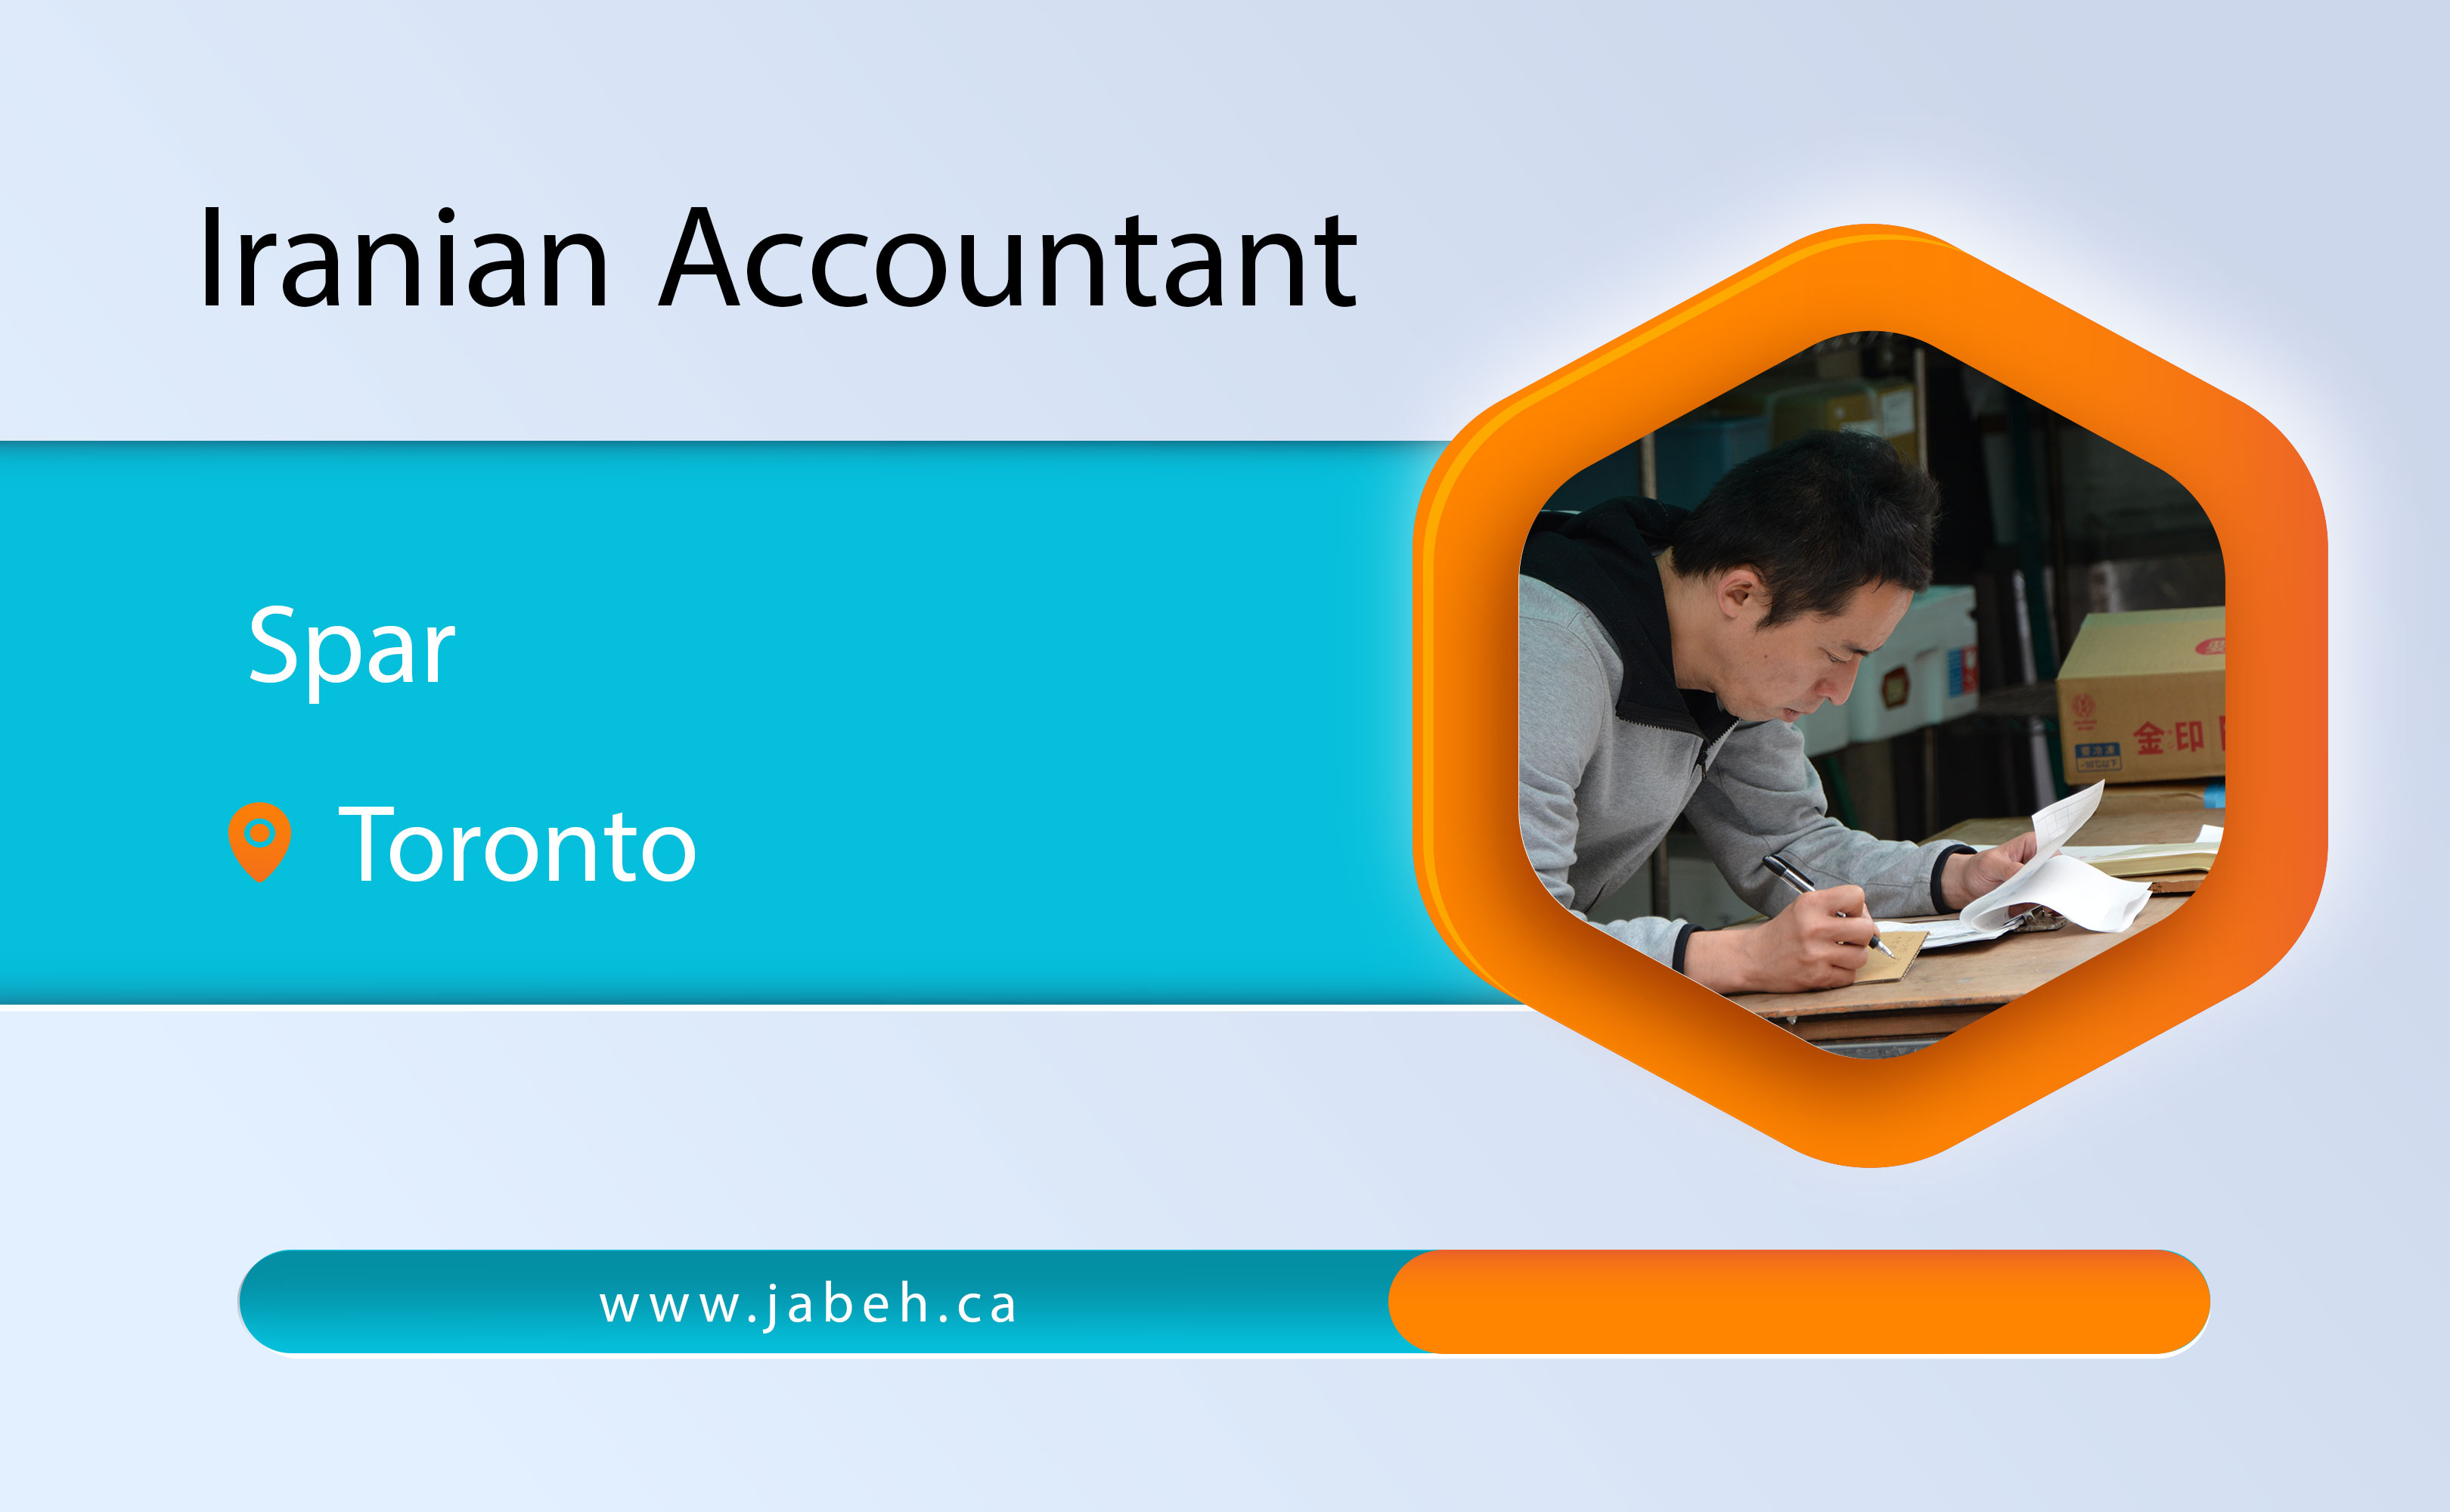 Spar Iranian accounting in Toronto